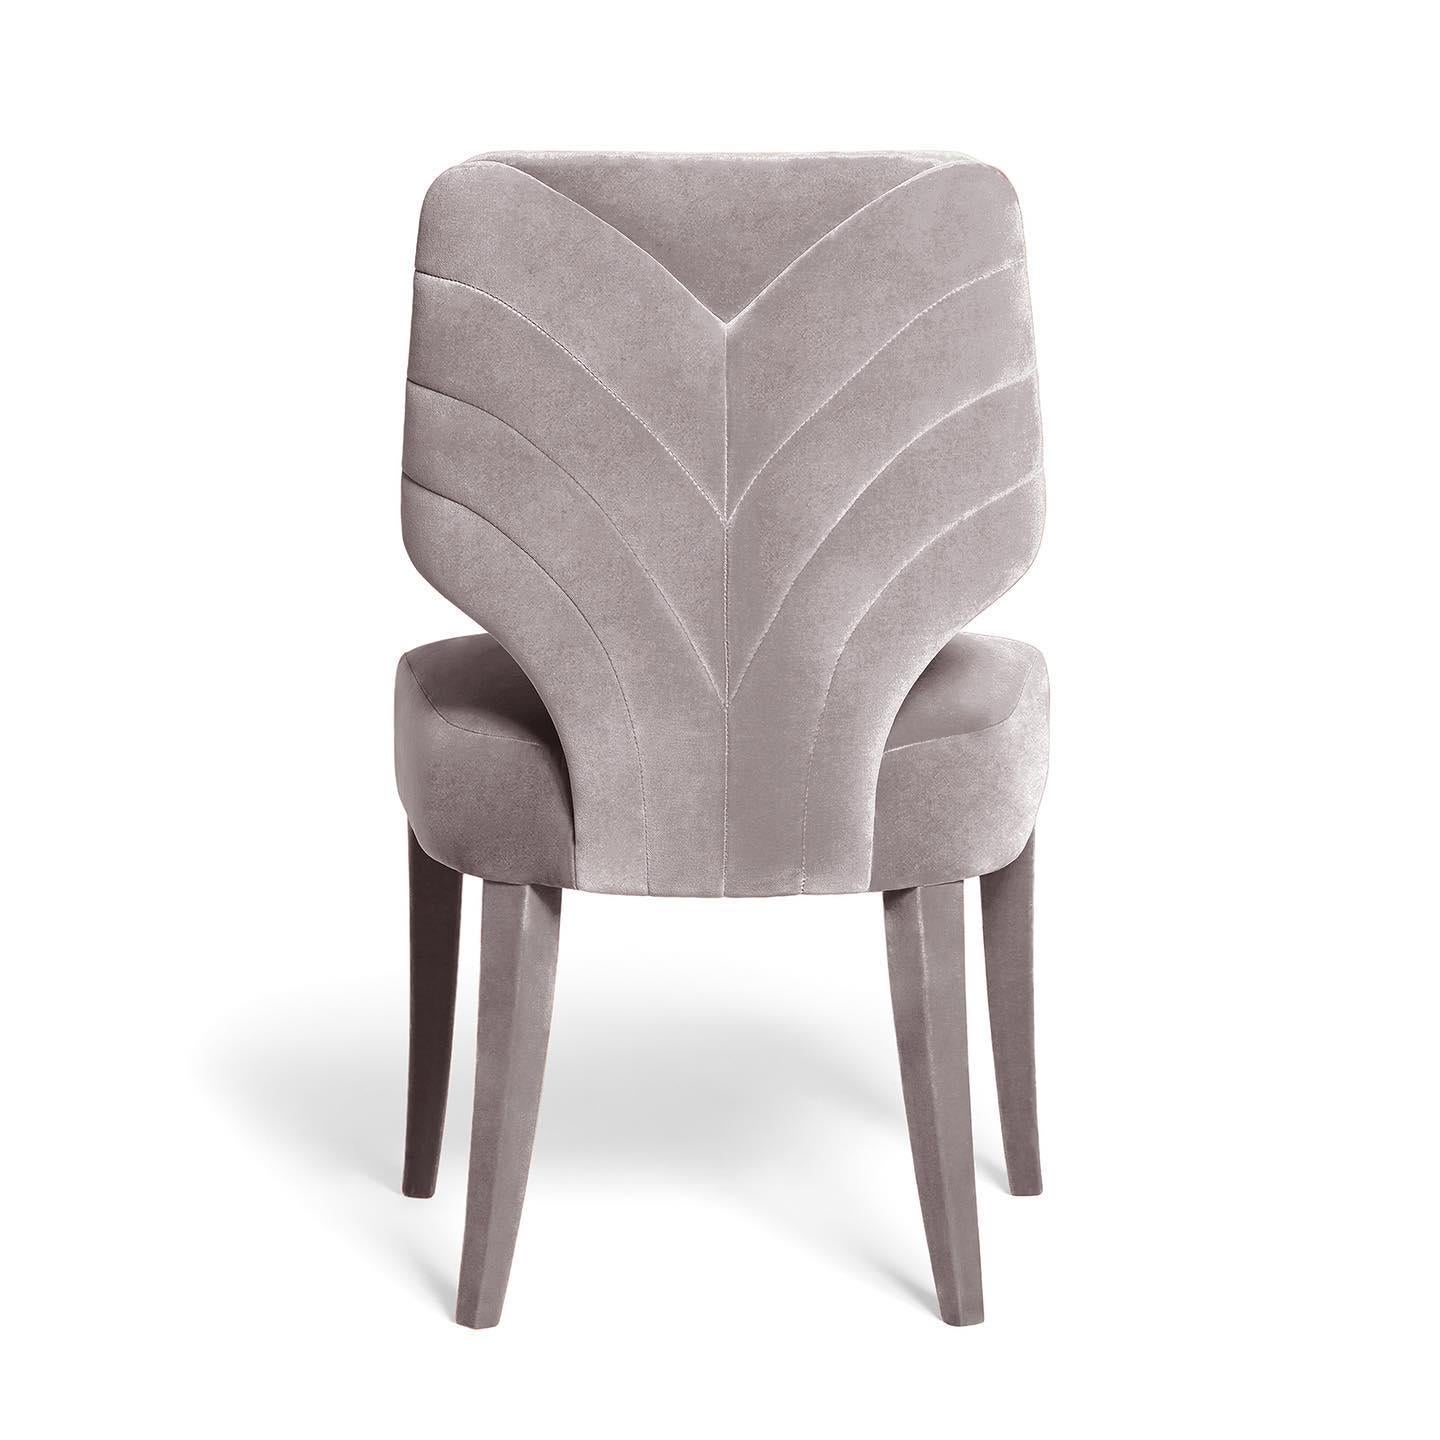 Contemporary Dining Chair with Seaming Details on the Back For Sale 2